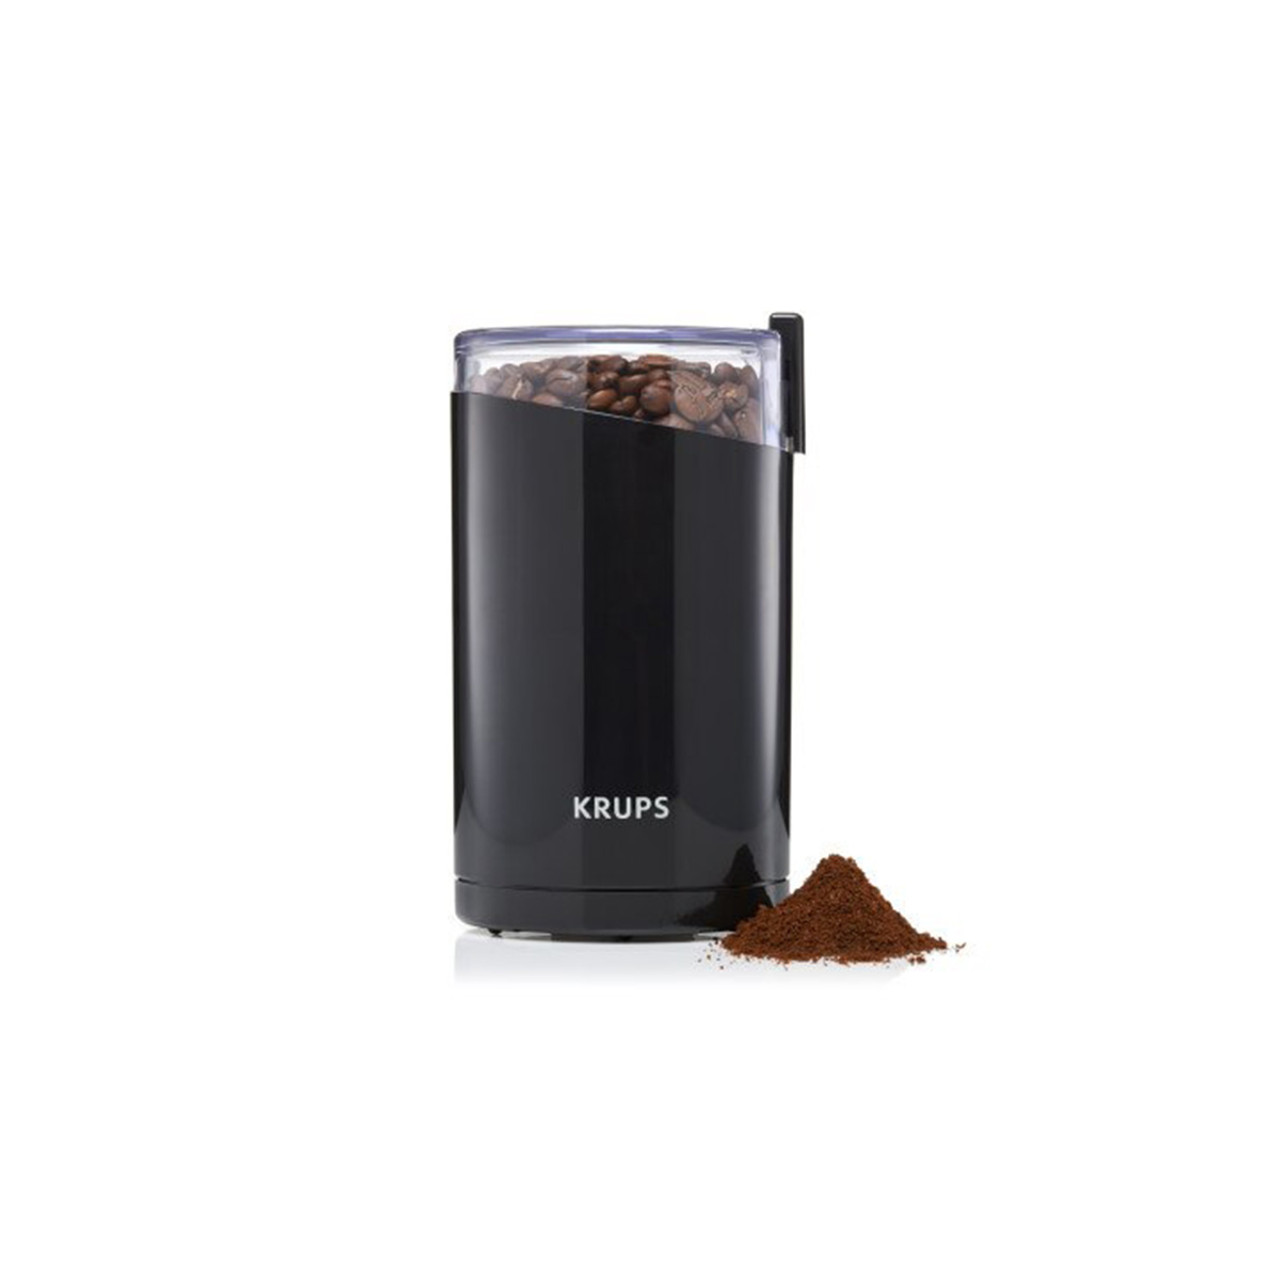 Krups Fast Touch Grinder - Cooks